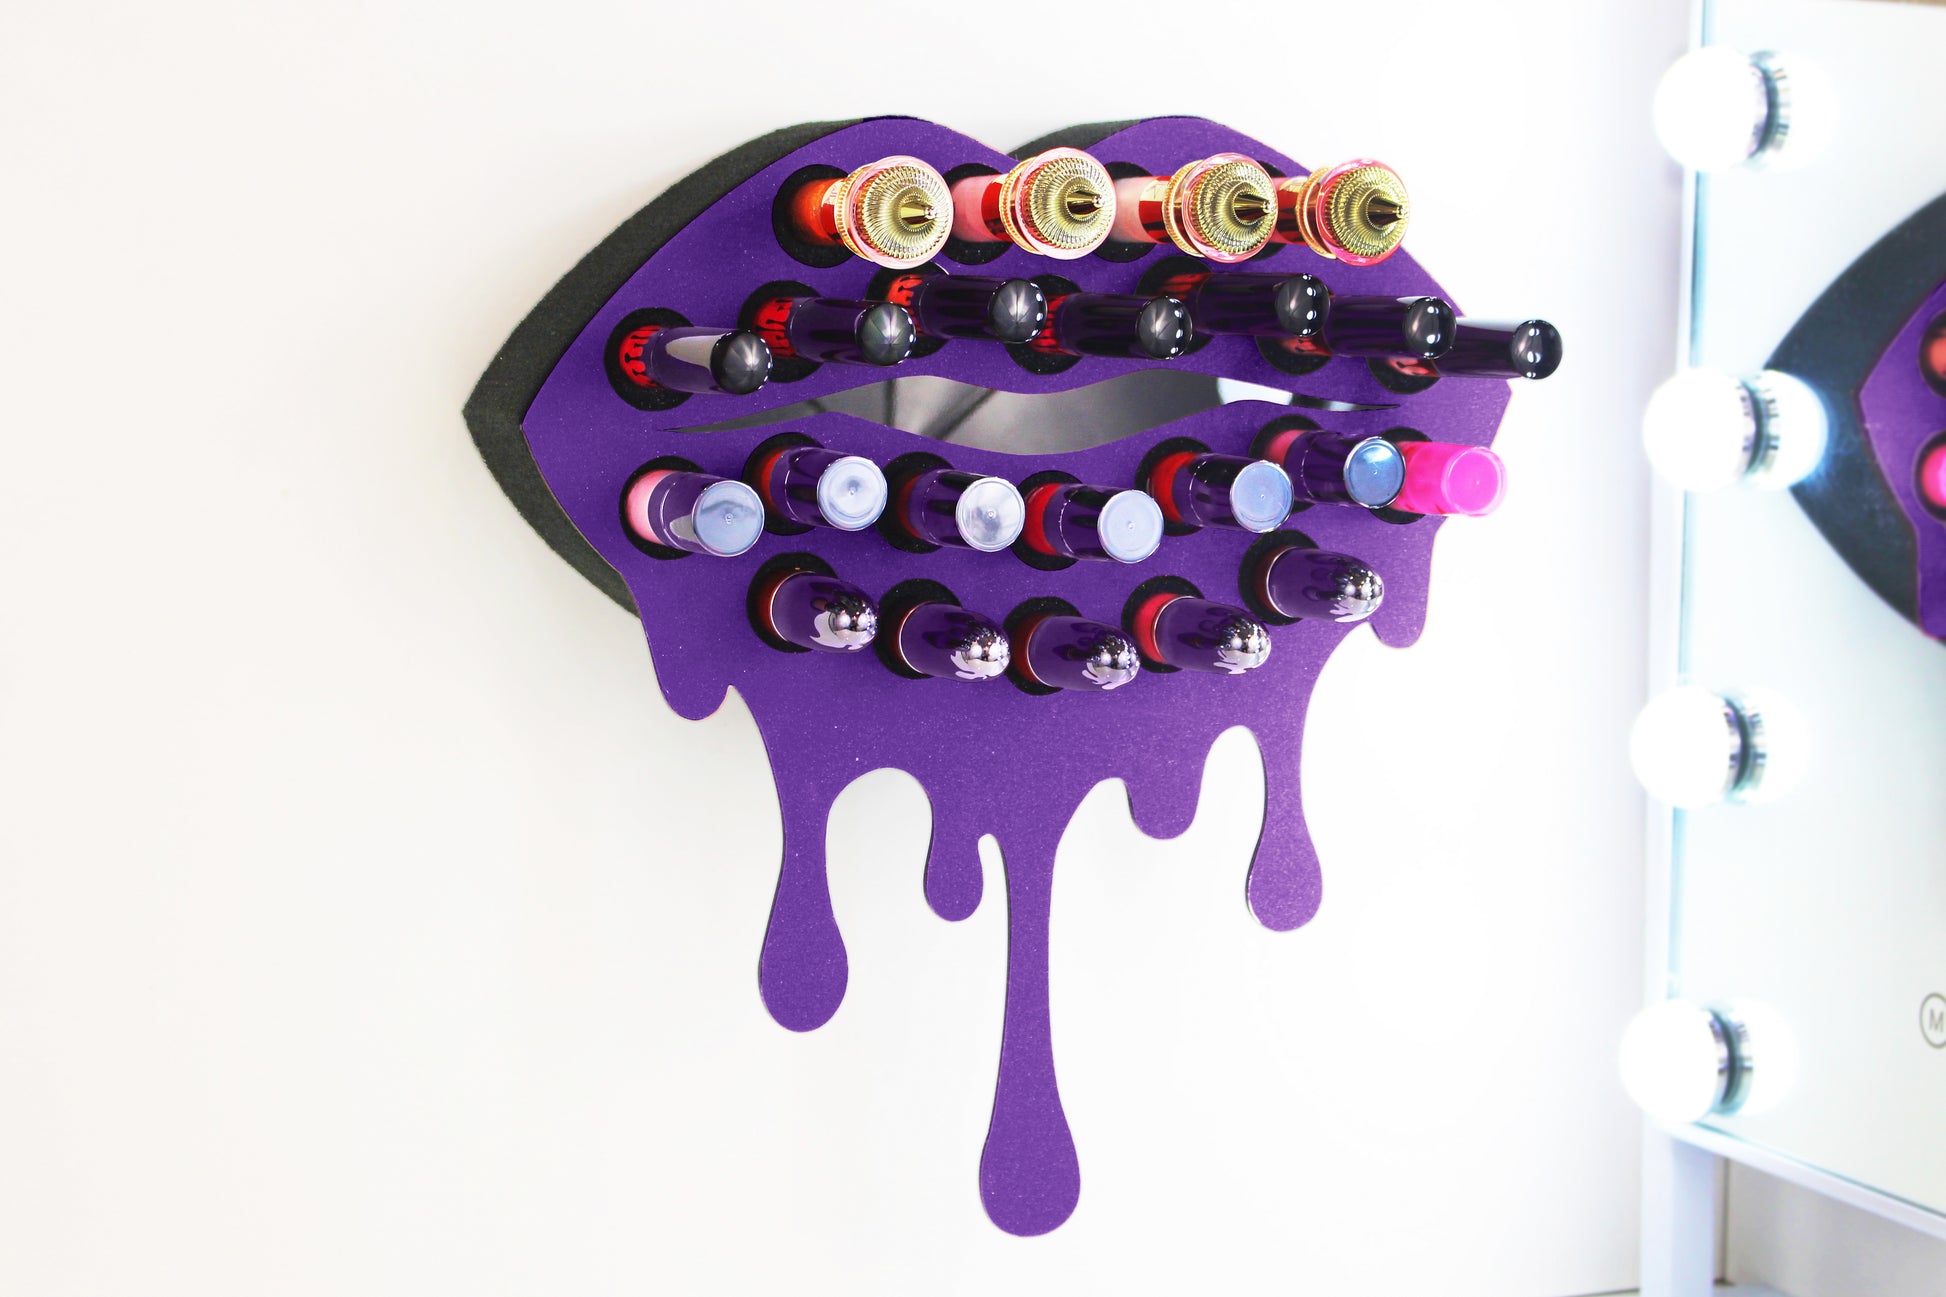 Medium Lip Design Lipstick Organizer holding 23 lipsticks mounted on the wall, keeping lipstick organized and easy to reach. This wall mounted makeup organizer looks like art on the wall of your bathroom or makeup room.